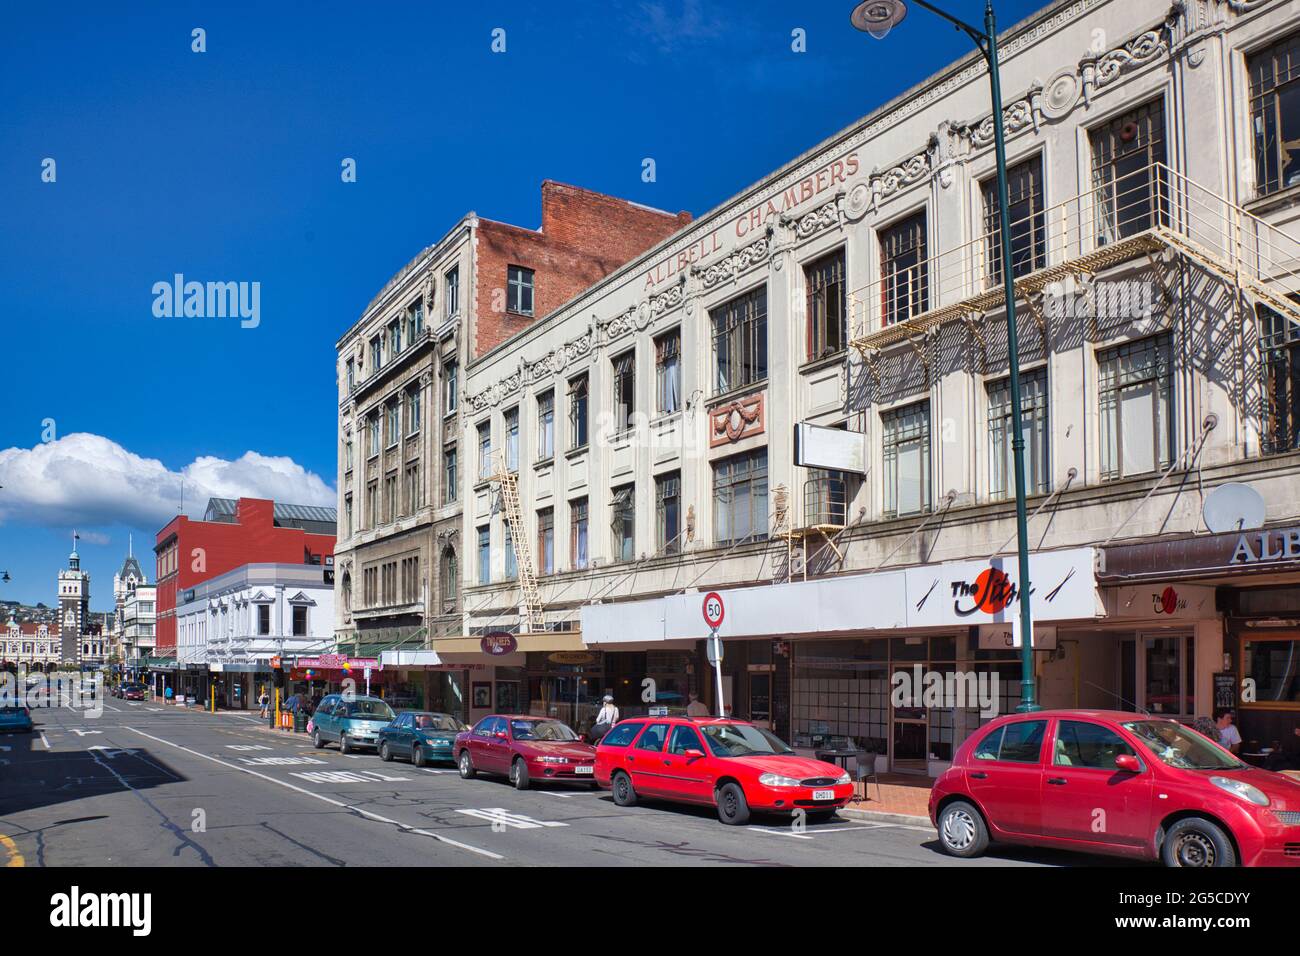 Street scene with shop fronts and cars looking towards the railway station in the distance, in Dunedin, South Island, New Zealand Stock Photo